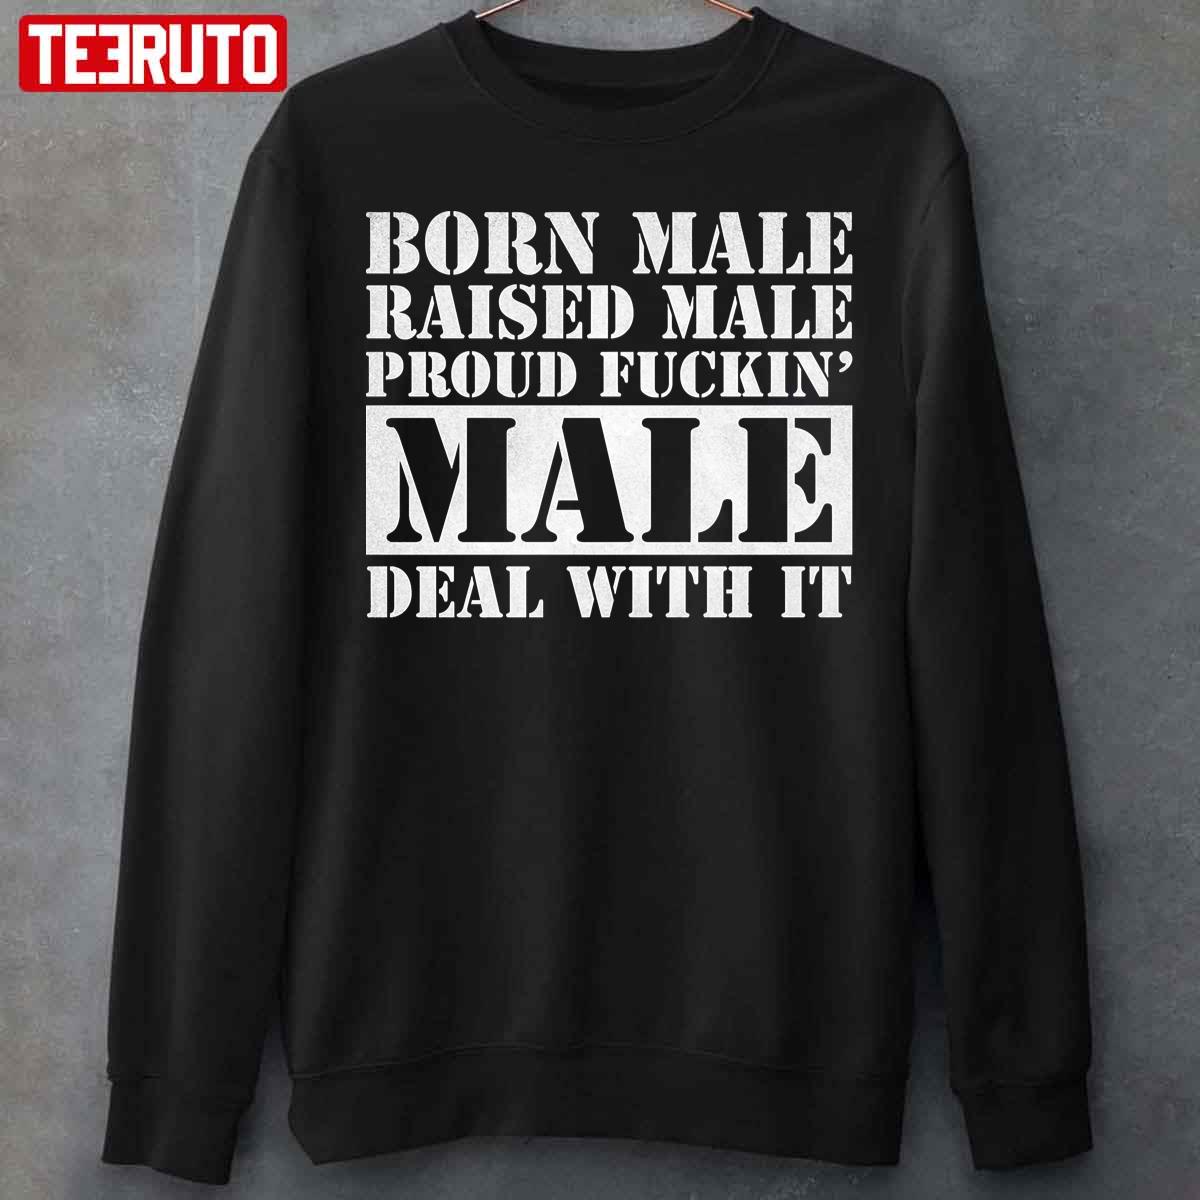 Born Male Raised Male Deal With It White Unisex T-Shirt